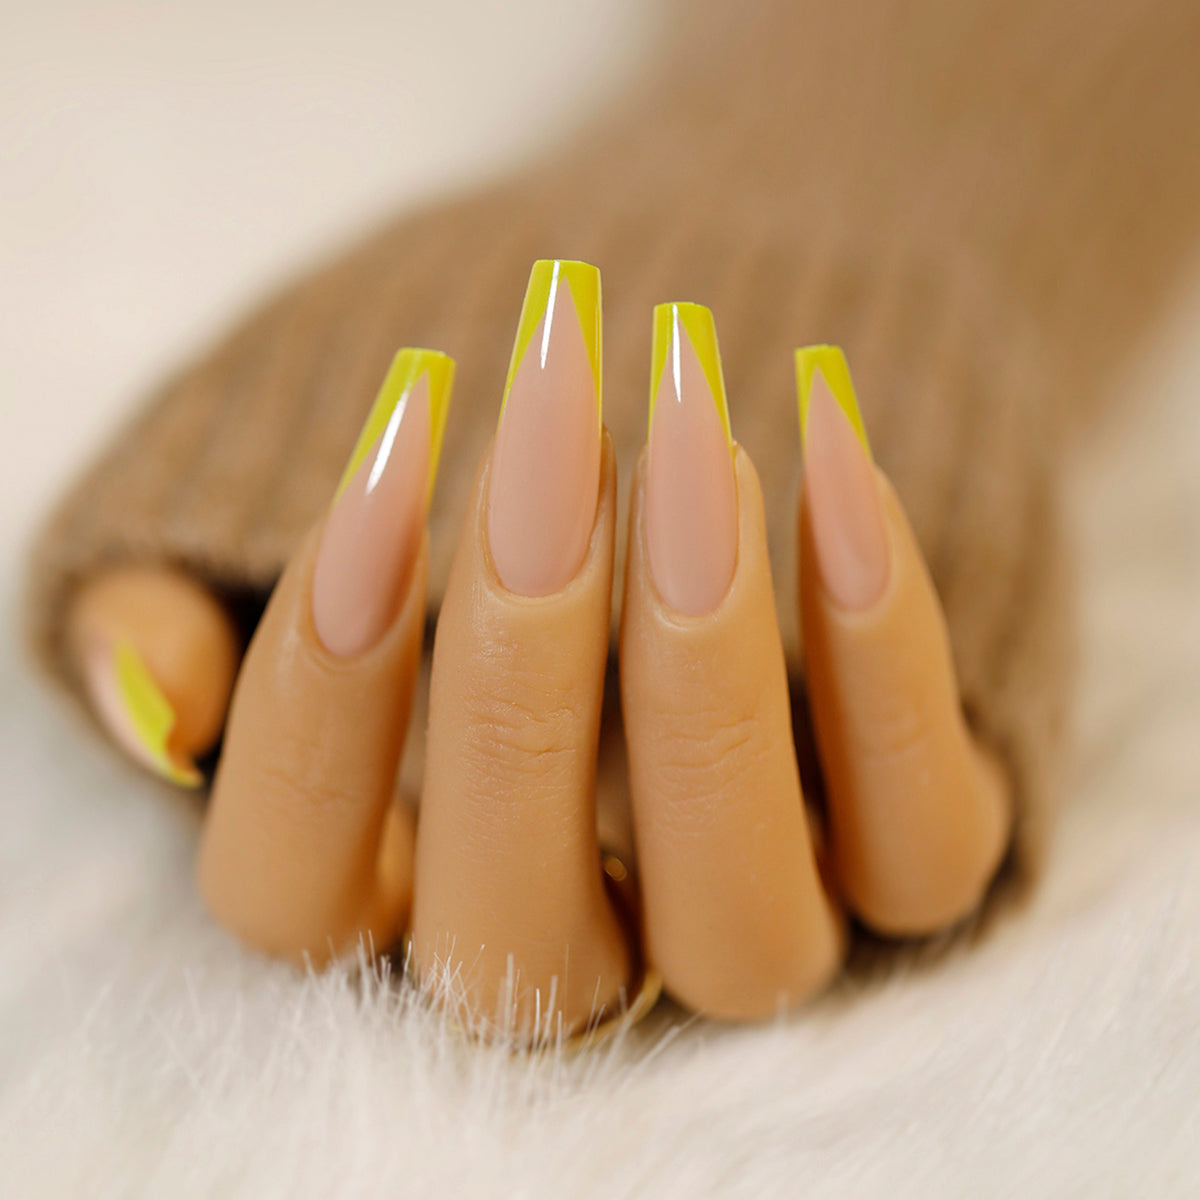 Lil Tiny Tip Long Coffin Yellow French Tips Press On Nails